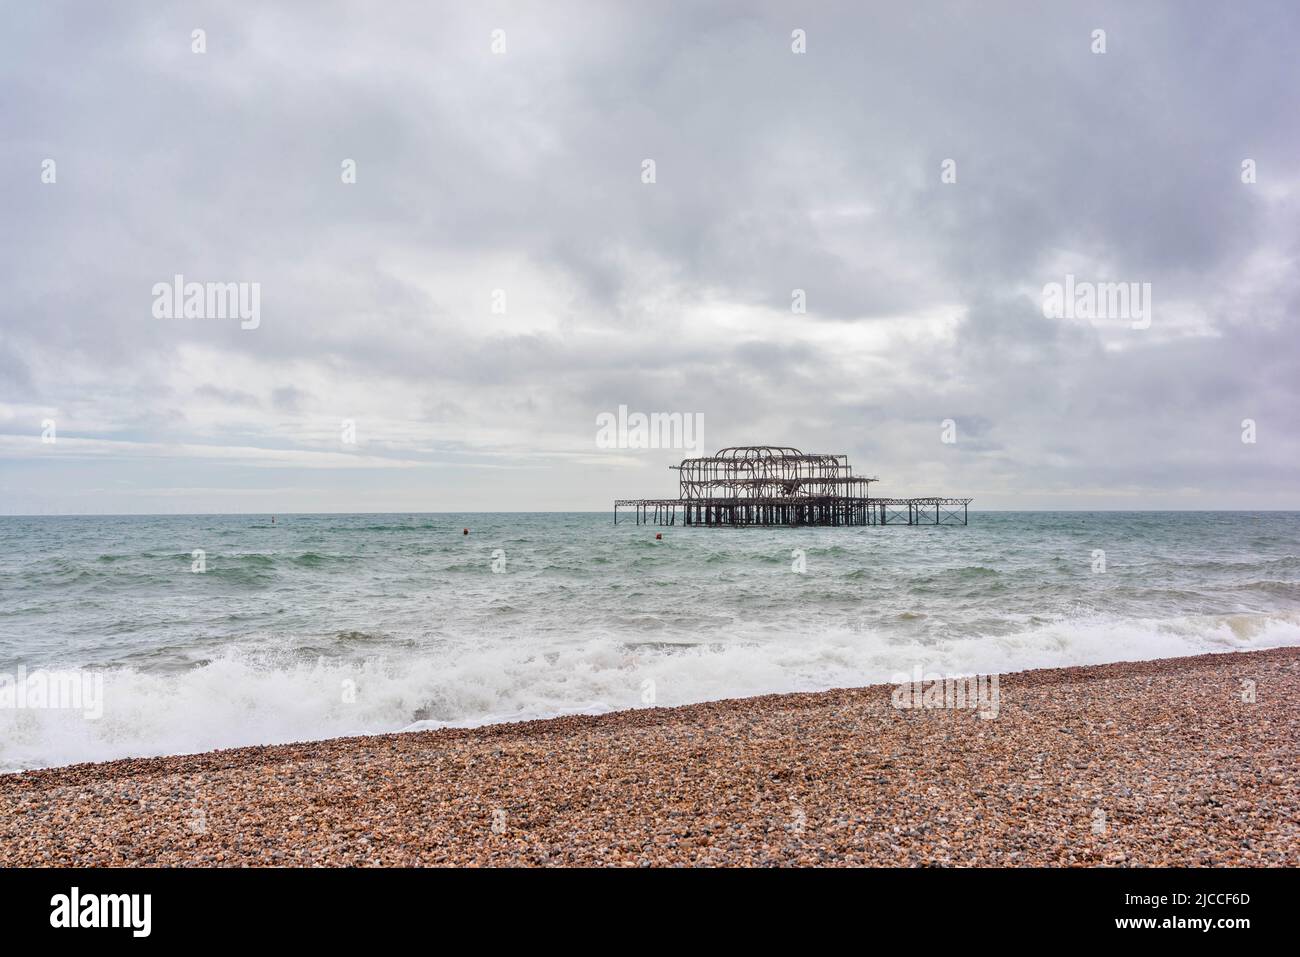 The remains of West Pier in Brighton during stormy weather, Brighton beach, East Sussex, England, UK Stock Photo